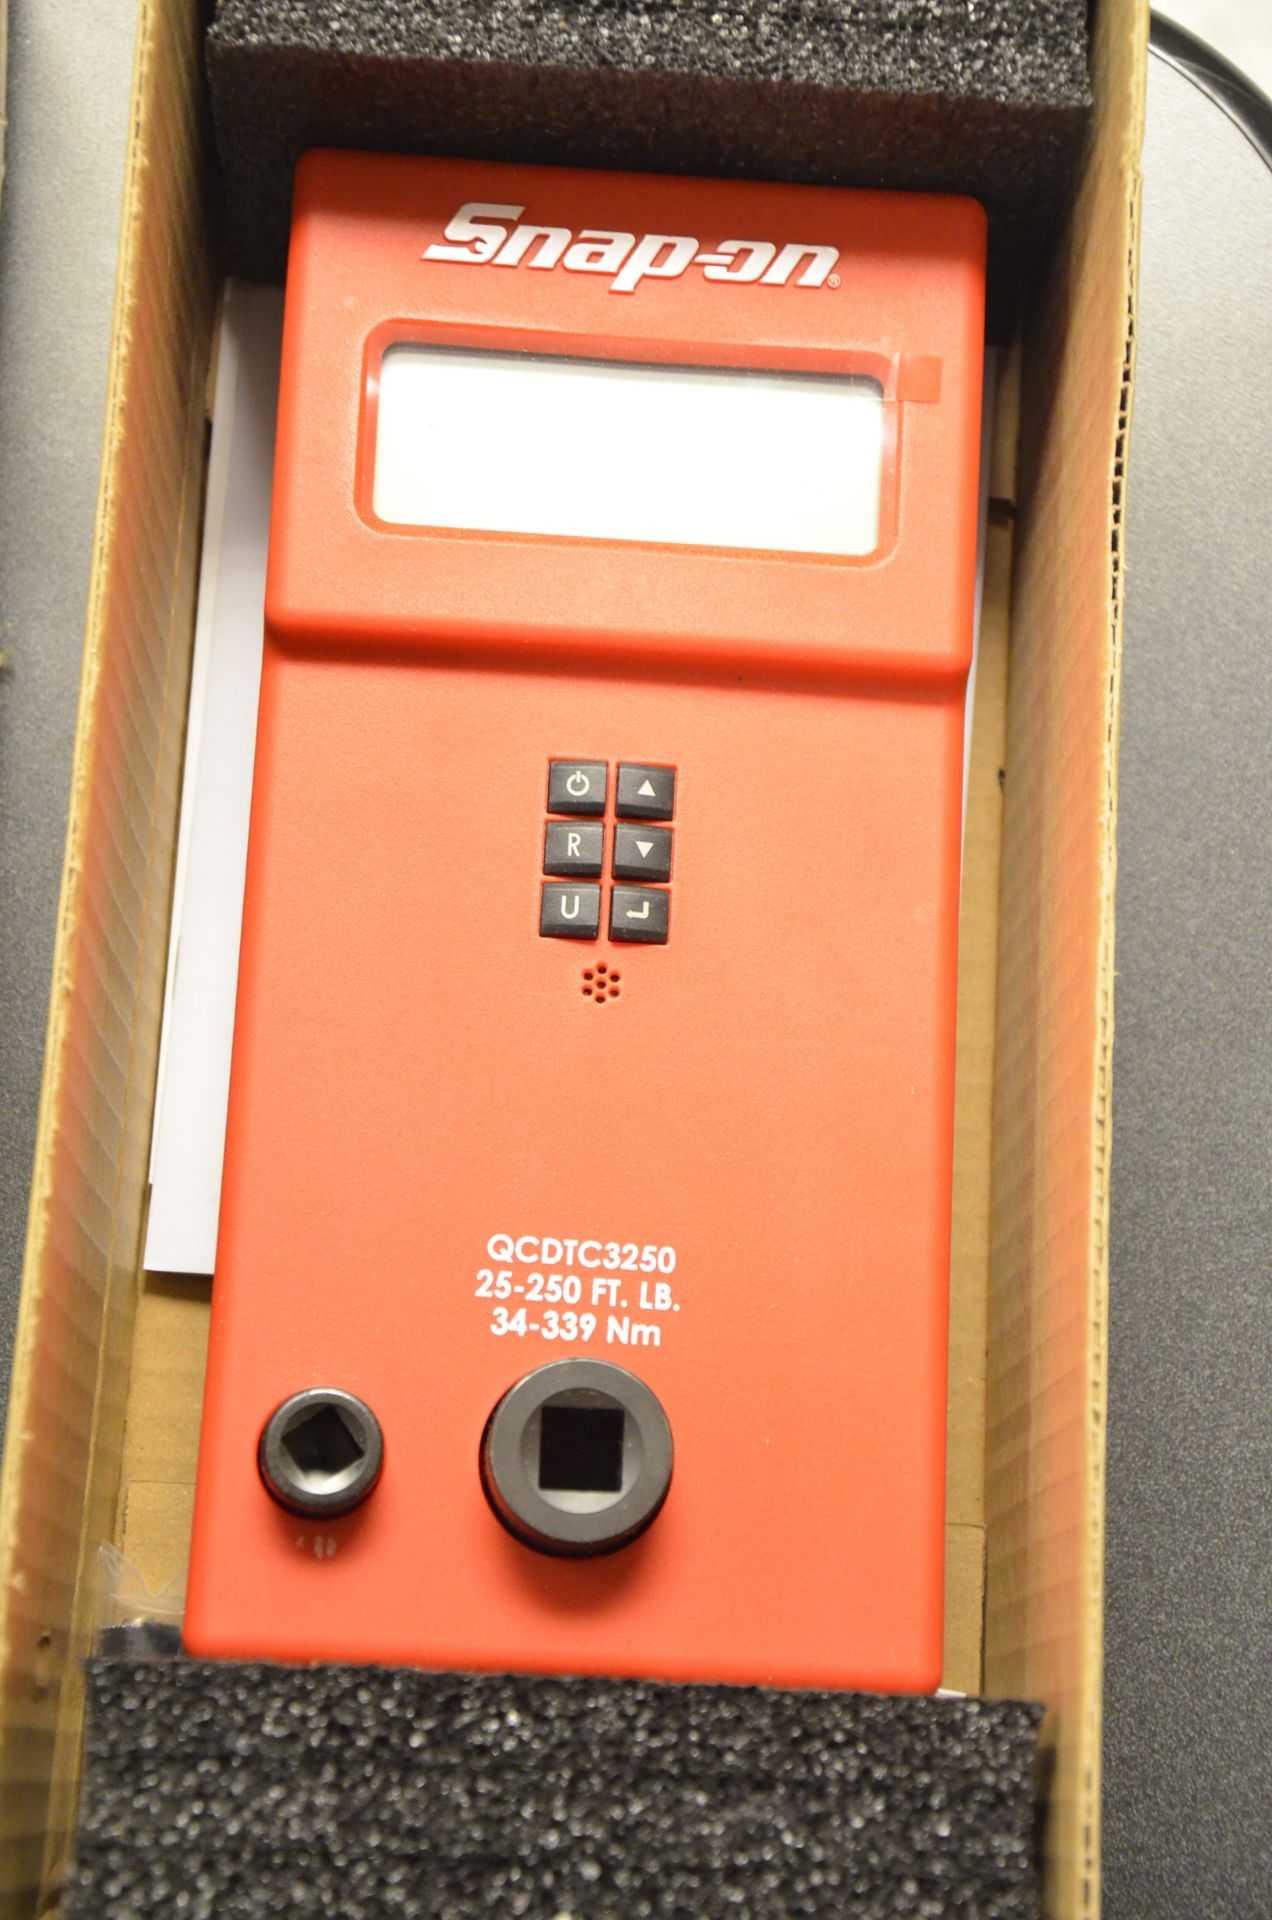 SNAP ON QCDTC3250 DIGITAL TORQUE CALIBRATOR WITH 25-250 FT. LBS CAPACITY, S/N N/A - Image 2 of 2